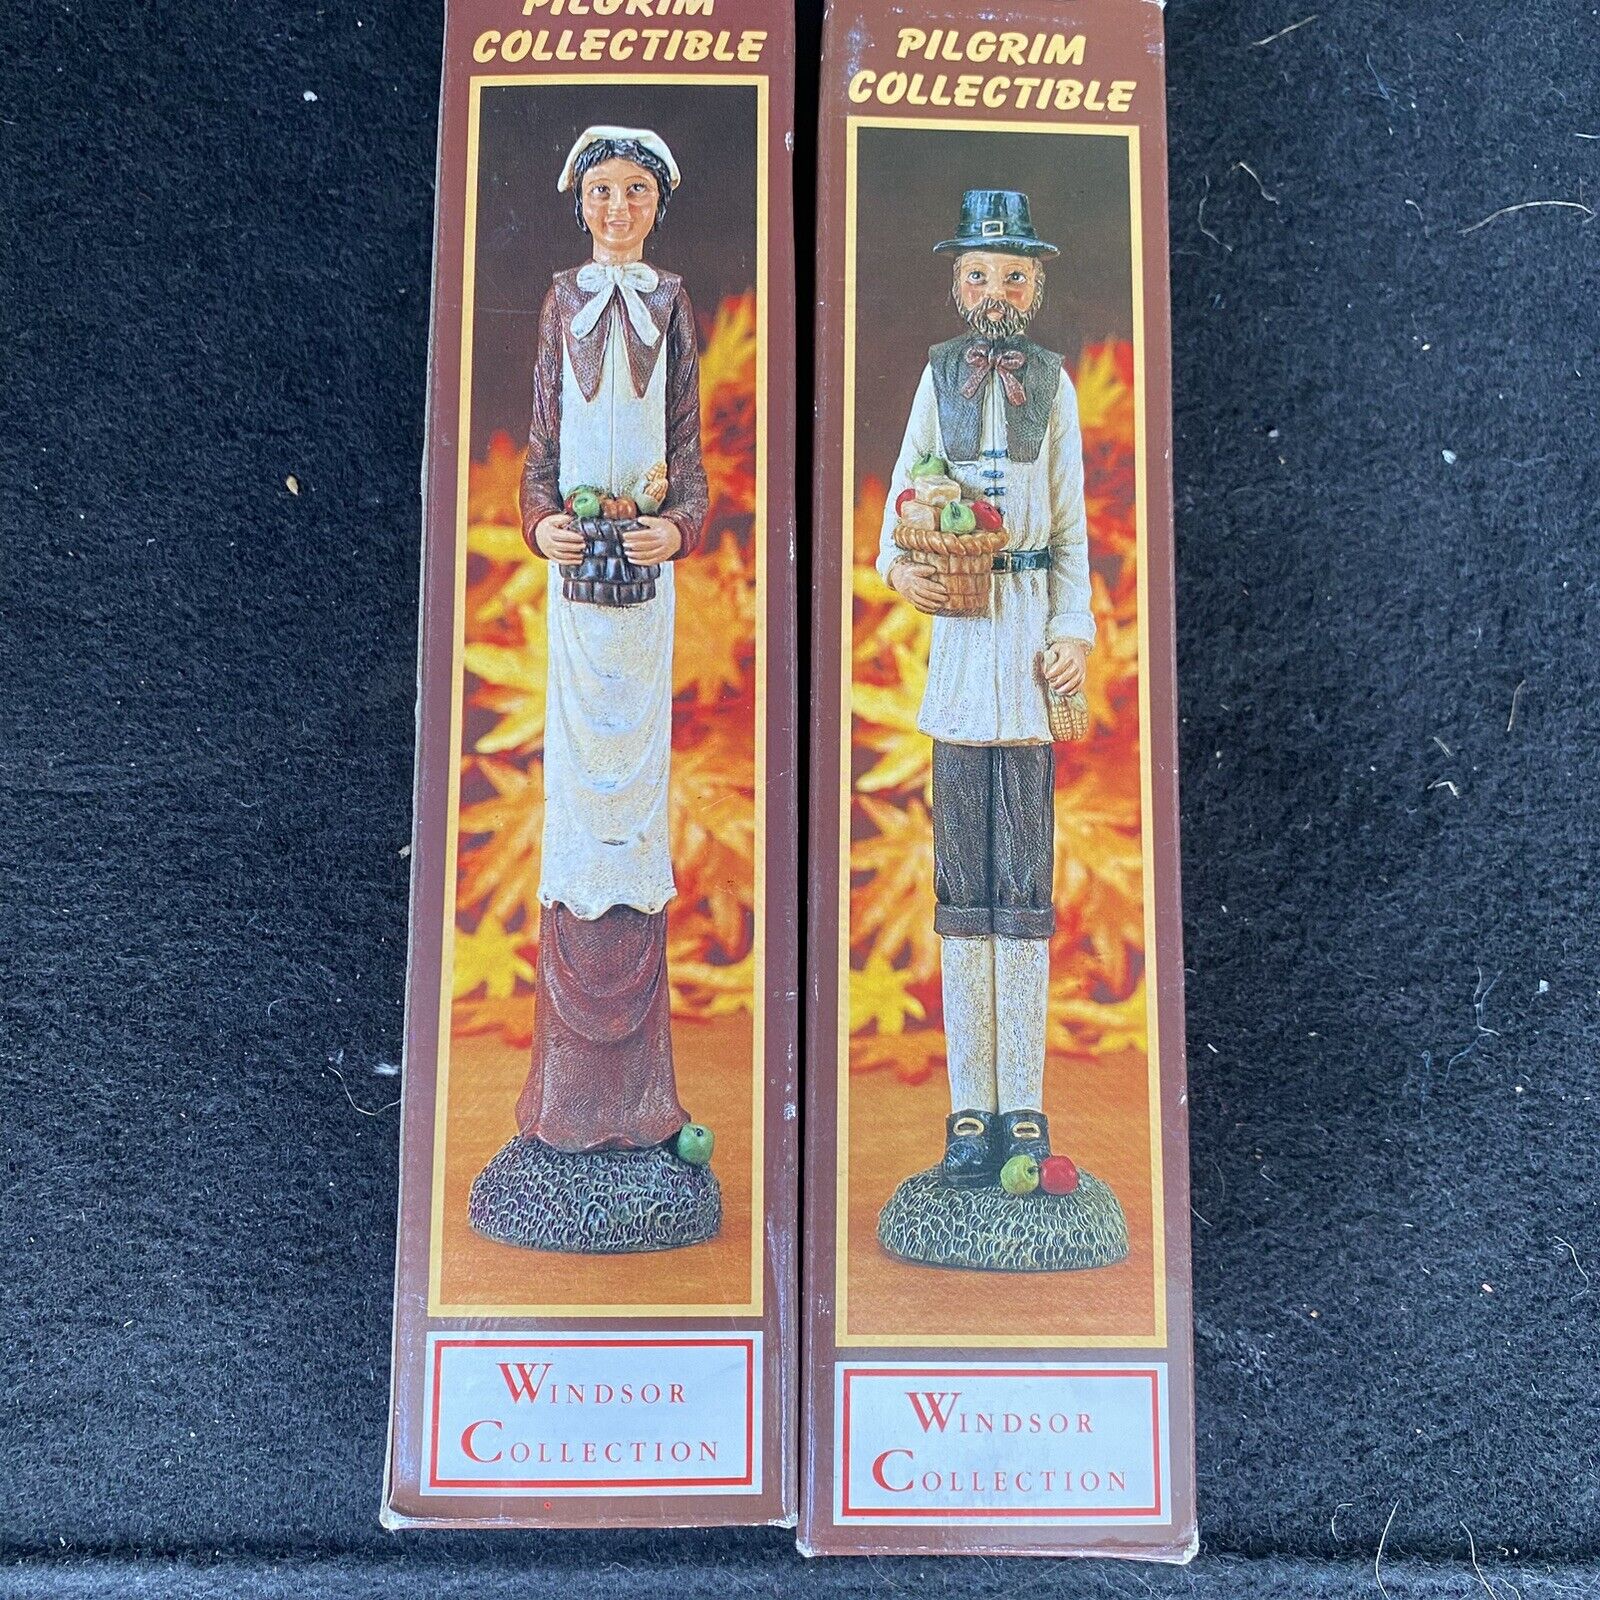 Windsor Collection Pilgrim Collectible Man & Woman Figurines Thanksgiving In Box